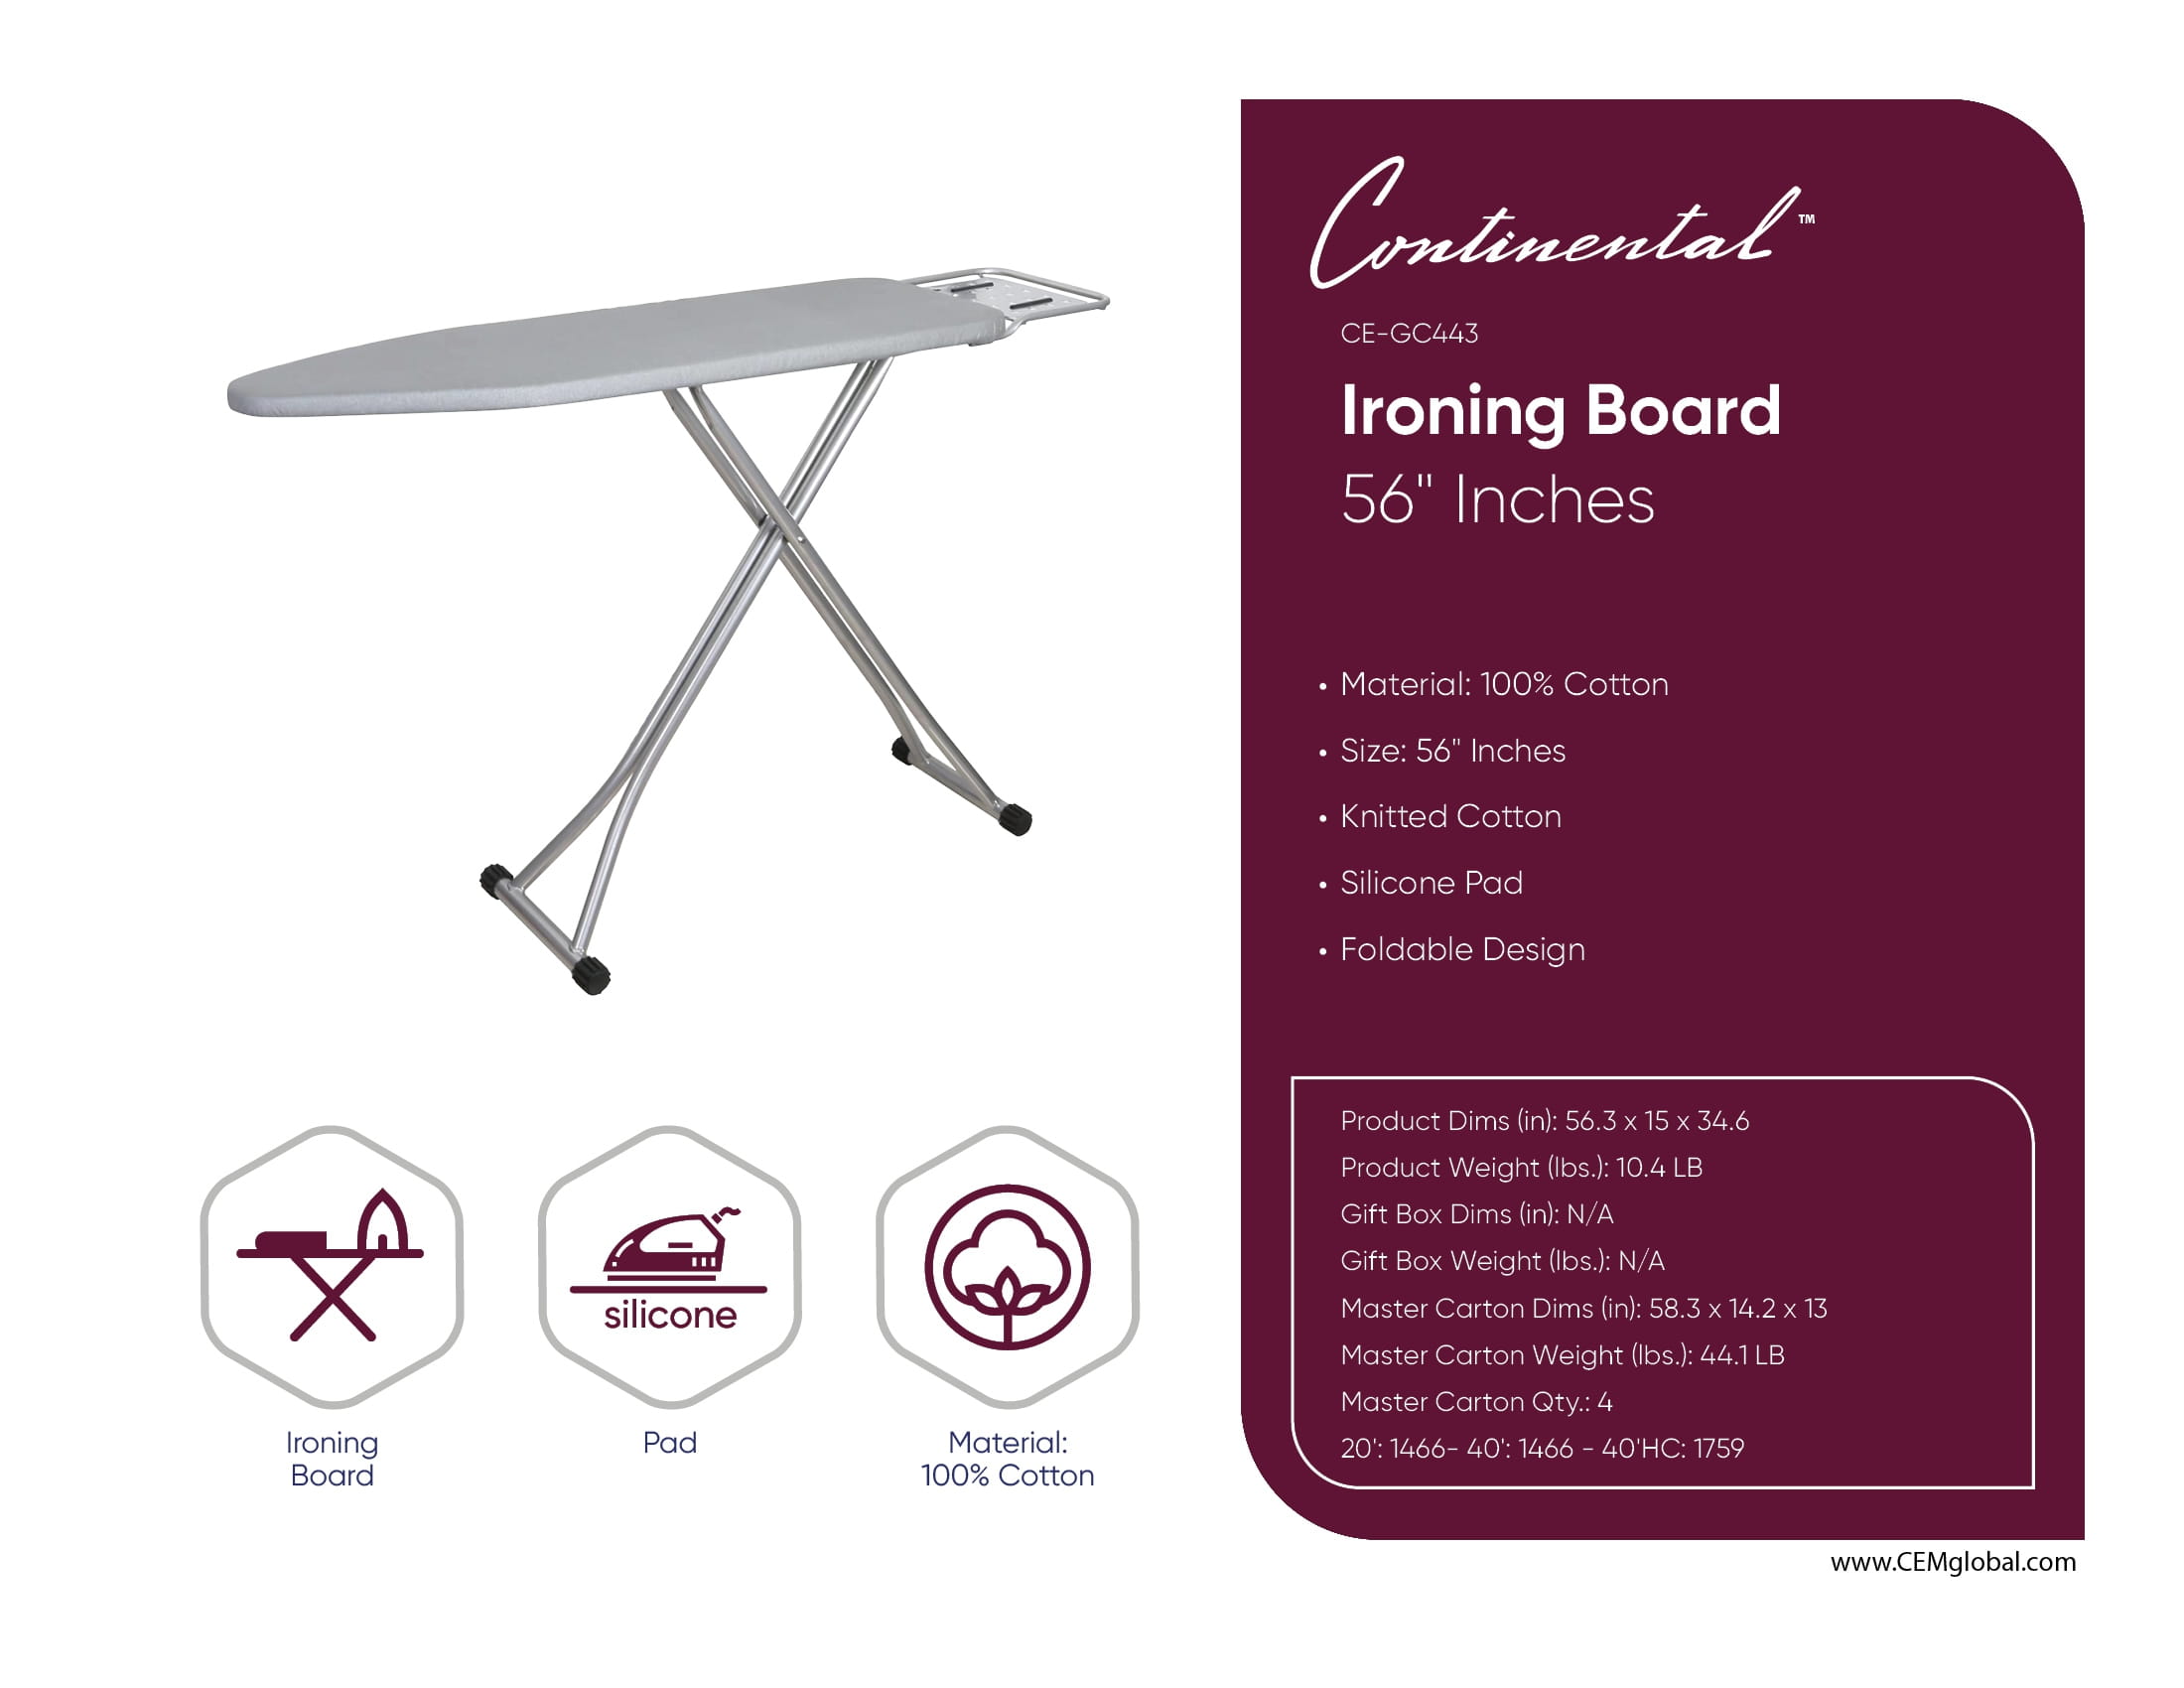 Ironing Board 56" Inches